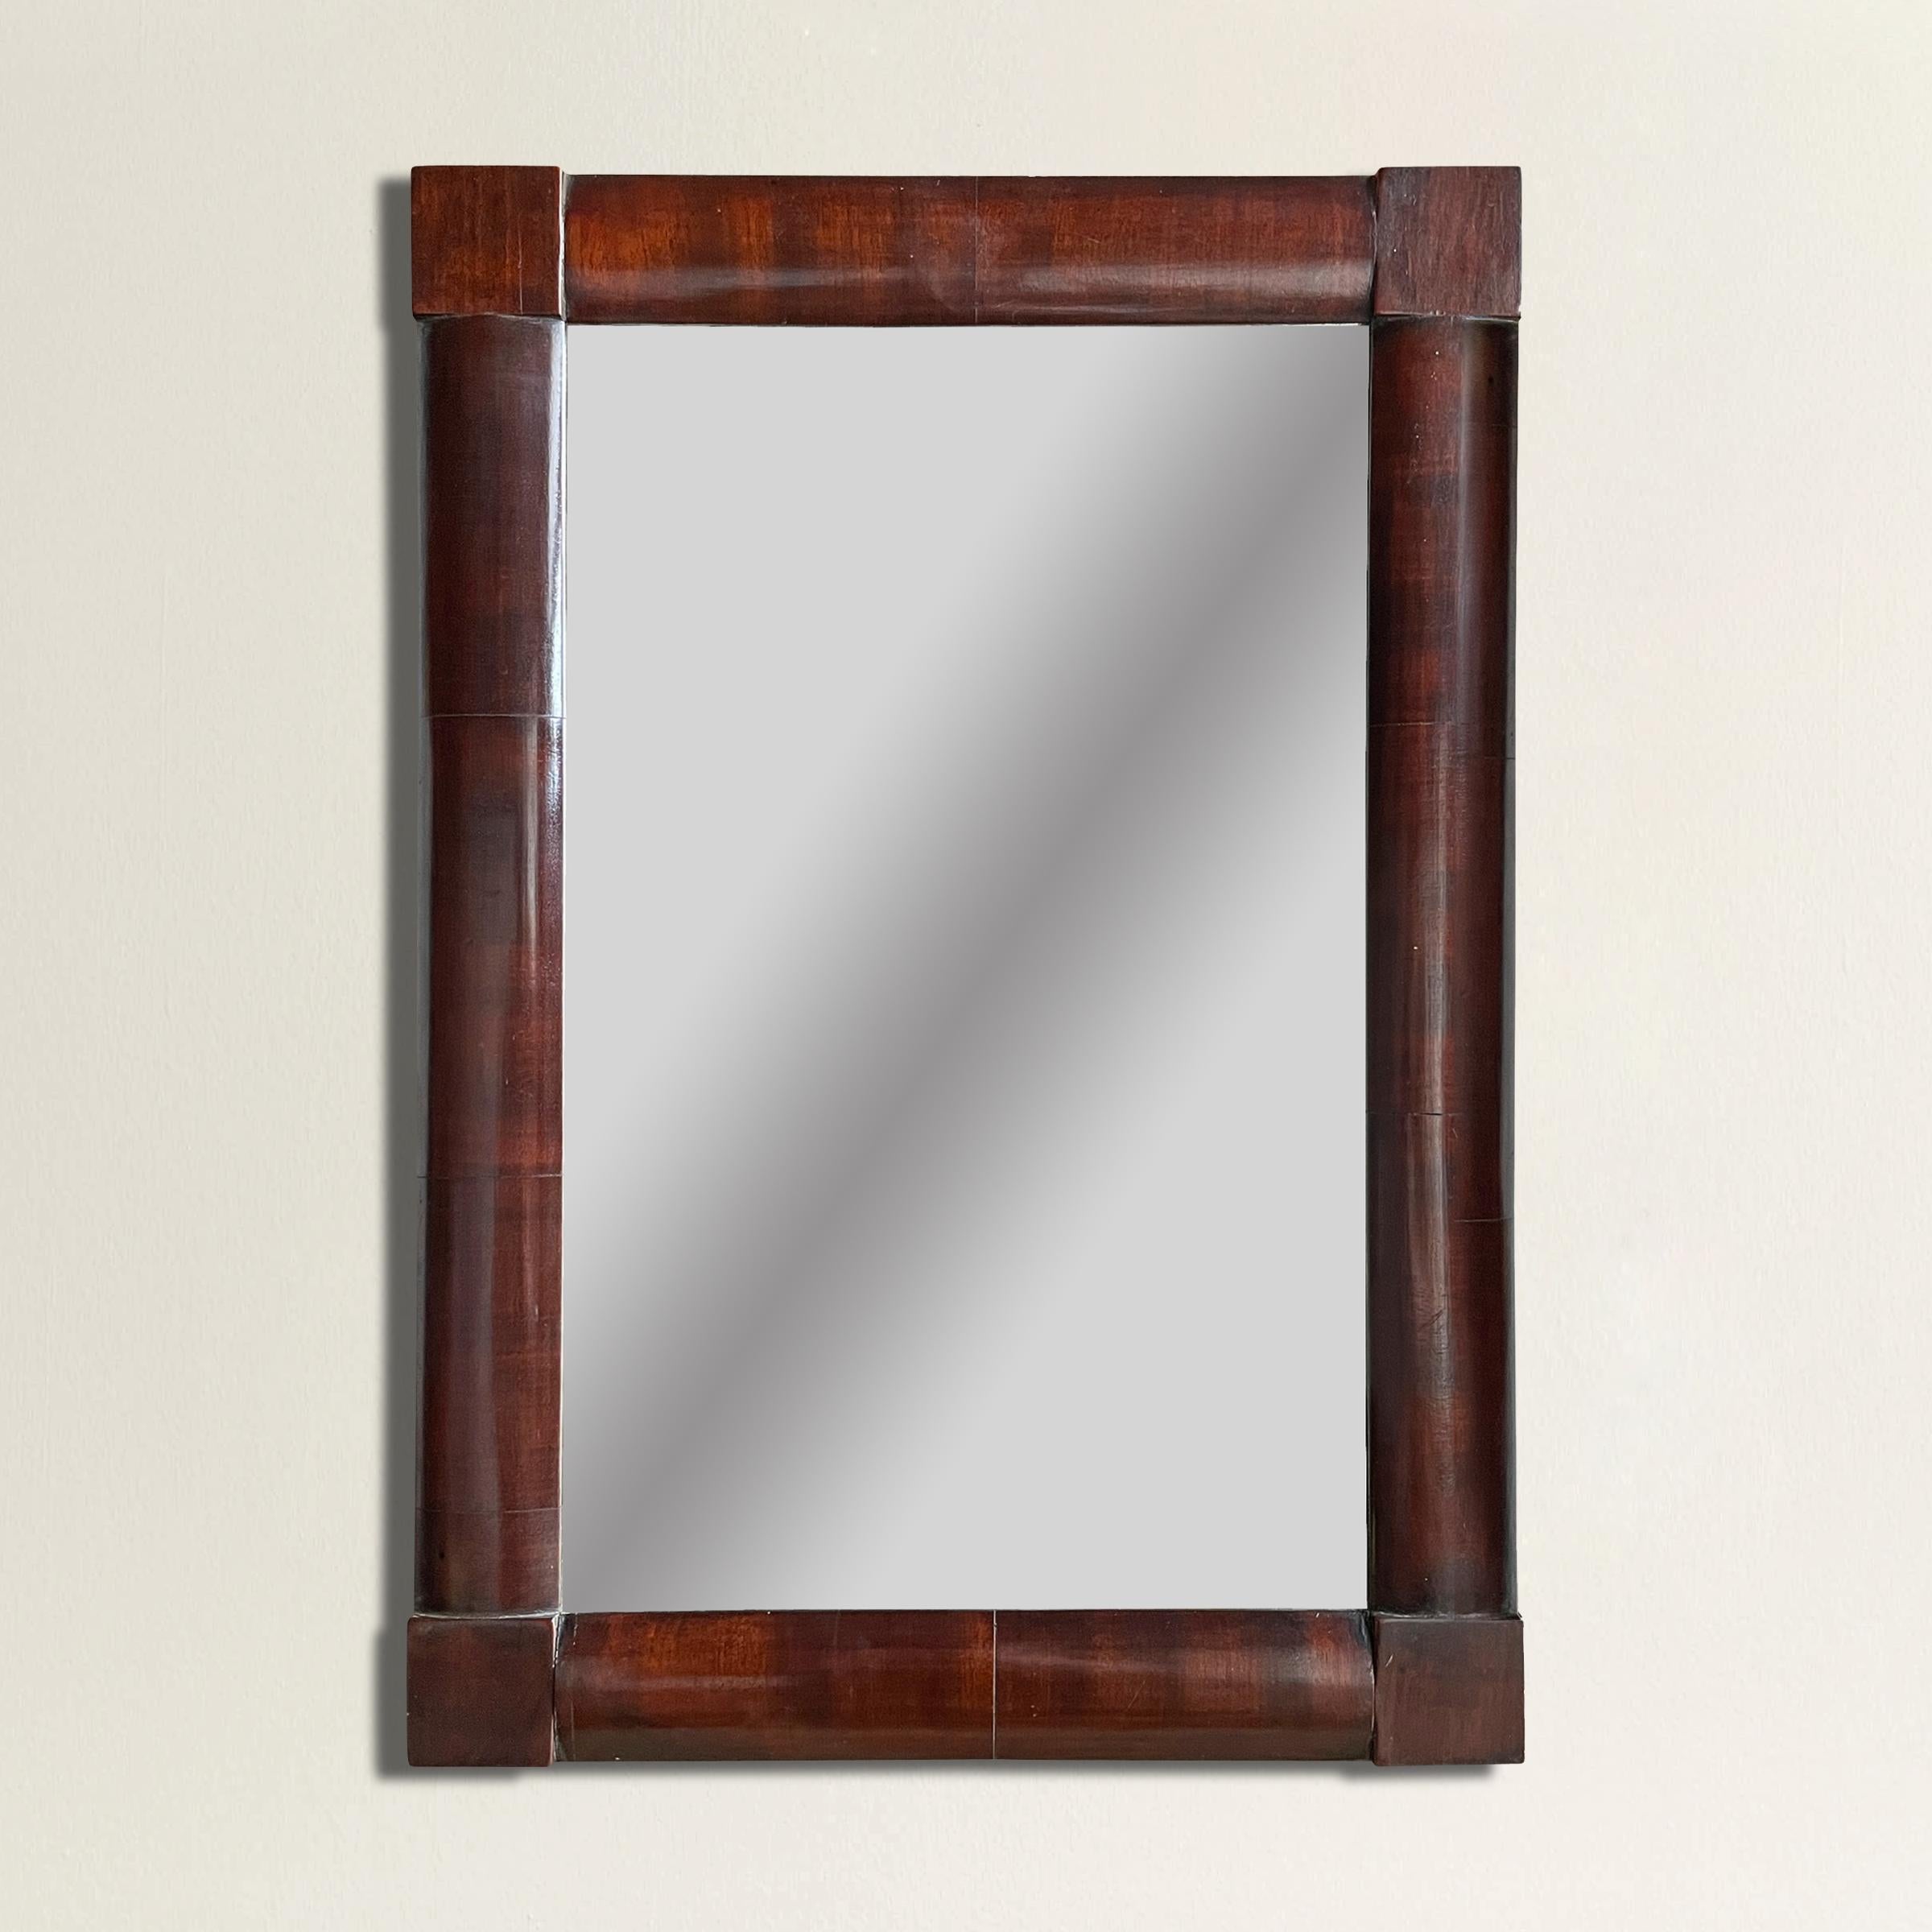 A petite 19th century American Empire mahogany veneer shaving mirror, and a rounded frame with square block corners.